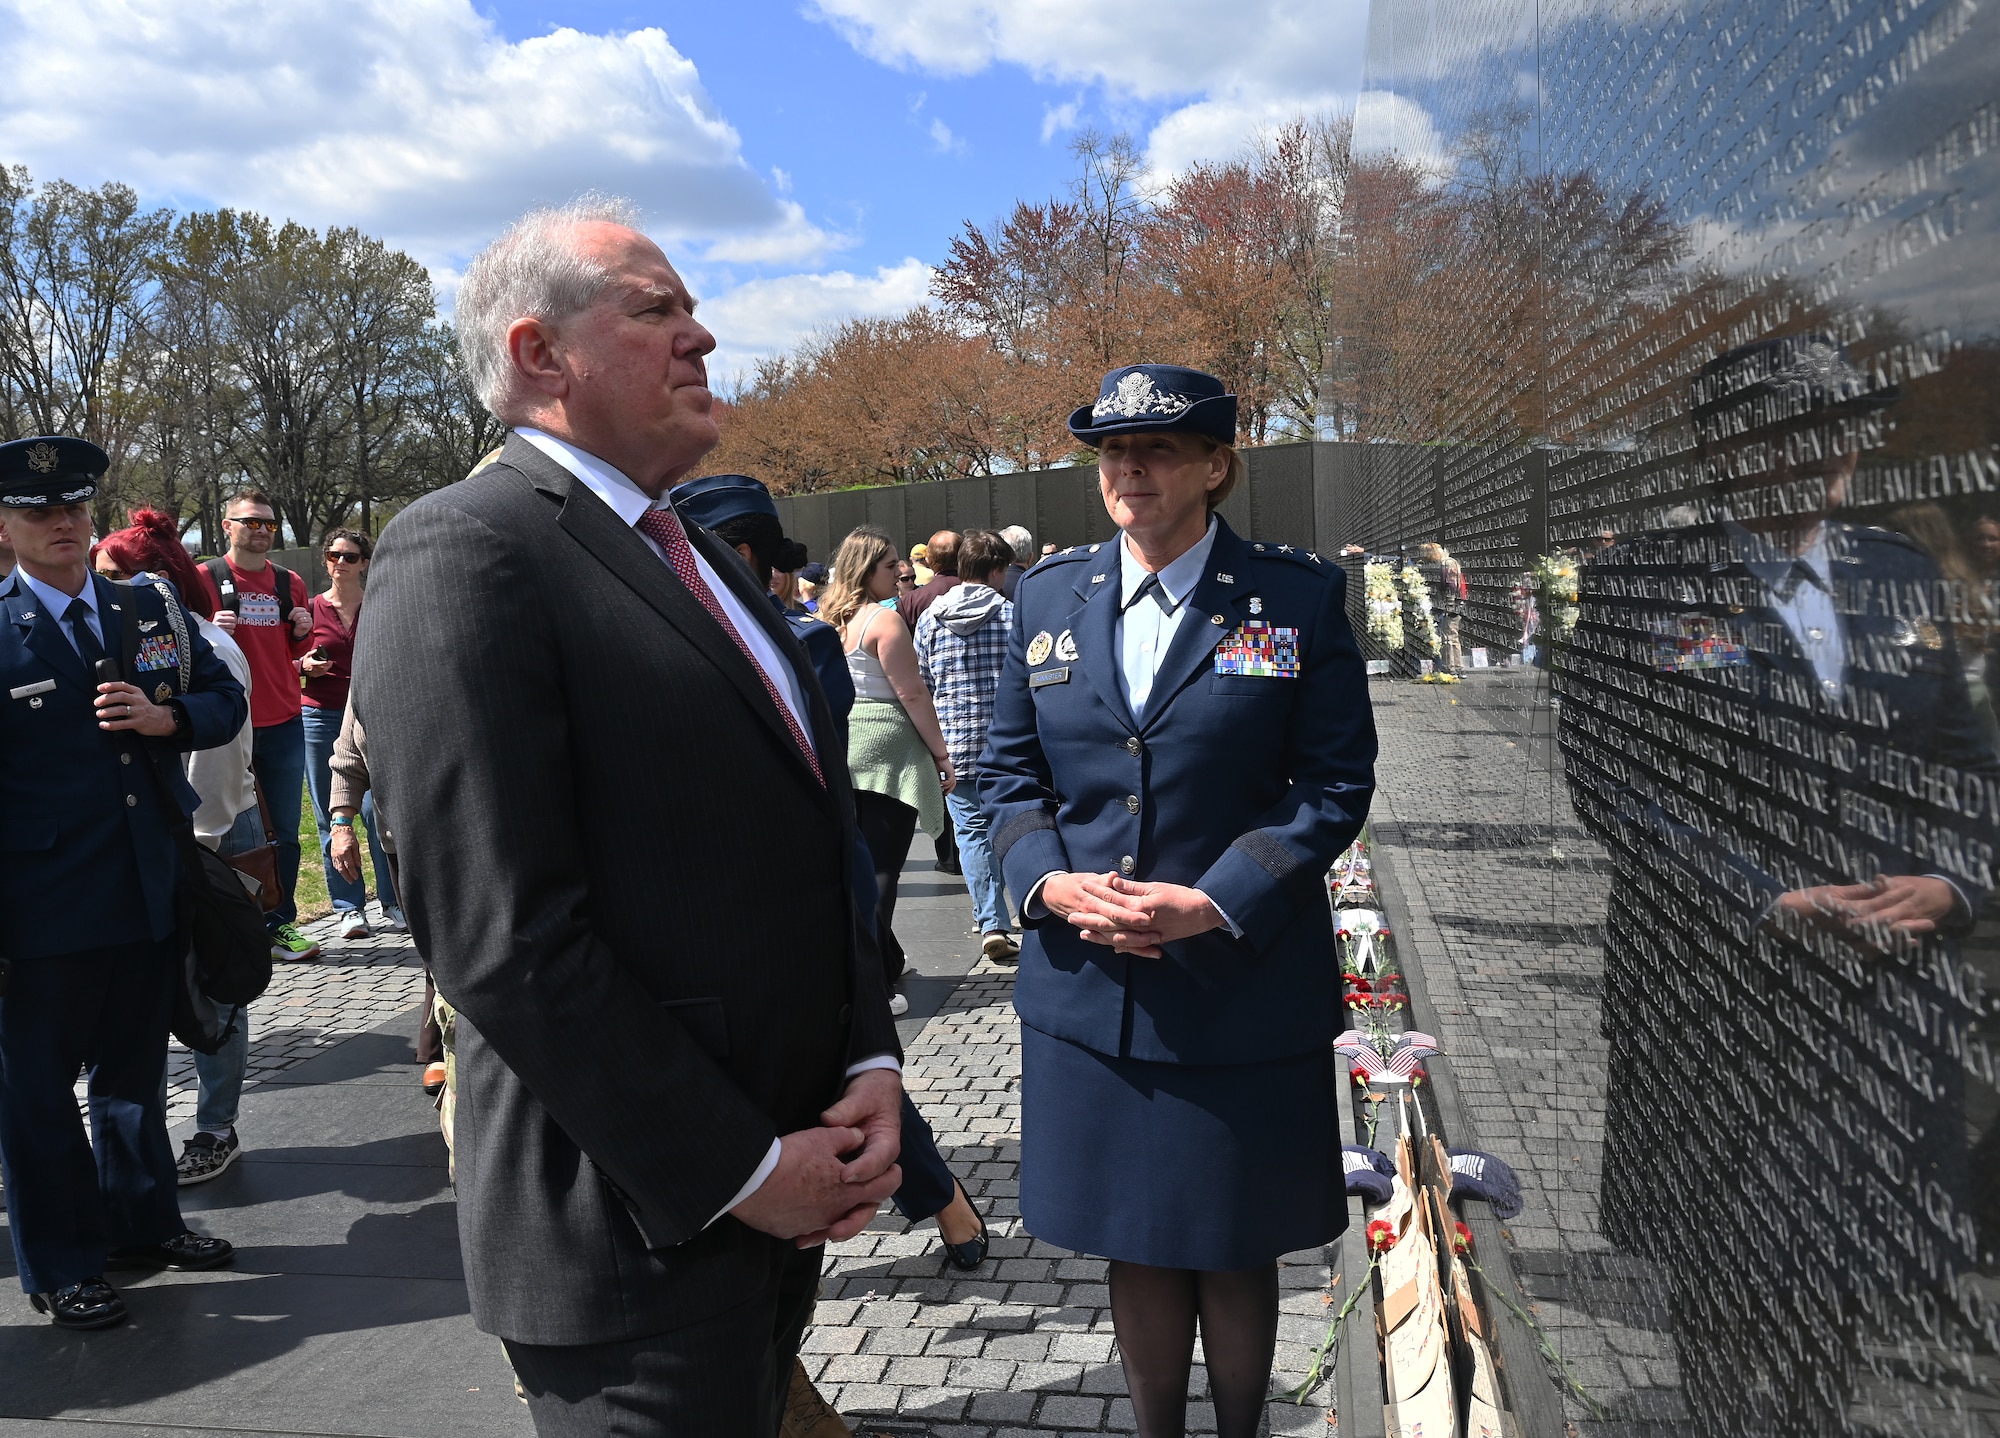 Secretary of the Air Force Frank Kendall visits the Vietnam War Memorial, Washington, D.C., March 29, 2023. Department of the Air Force senior leaders visited to pay their respects to the deceased service members killed in action during the Vietnam War on National Vietnam War Veteran’s Day. (U.S. Air Force photo by Staff Sgt. Chad Trujillo)